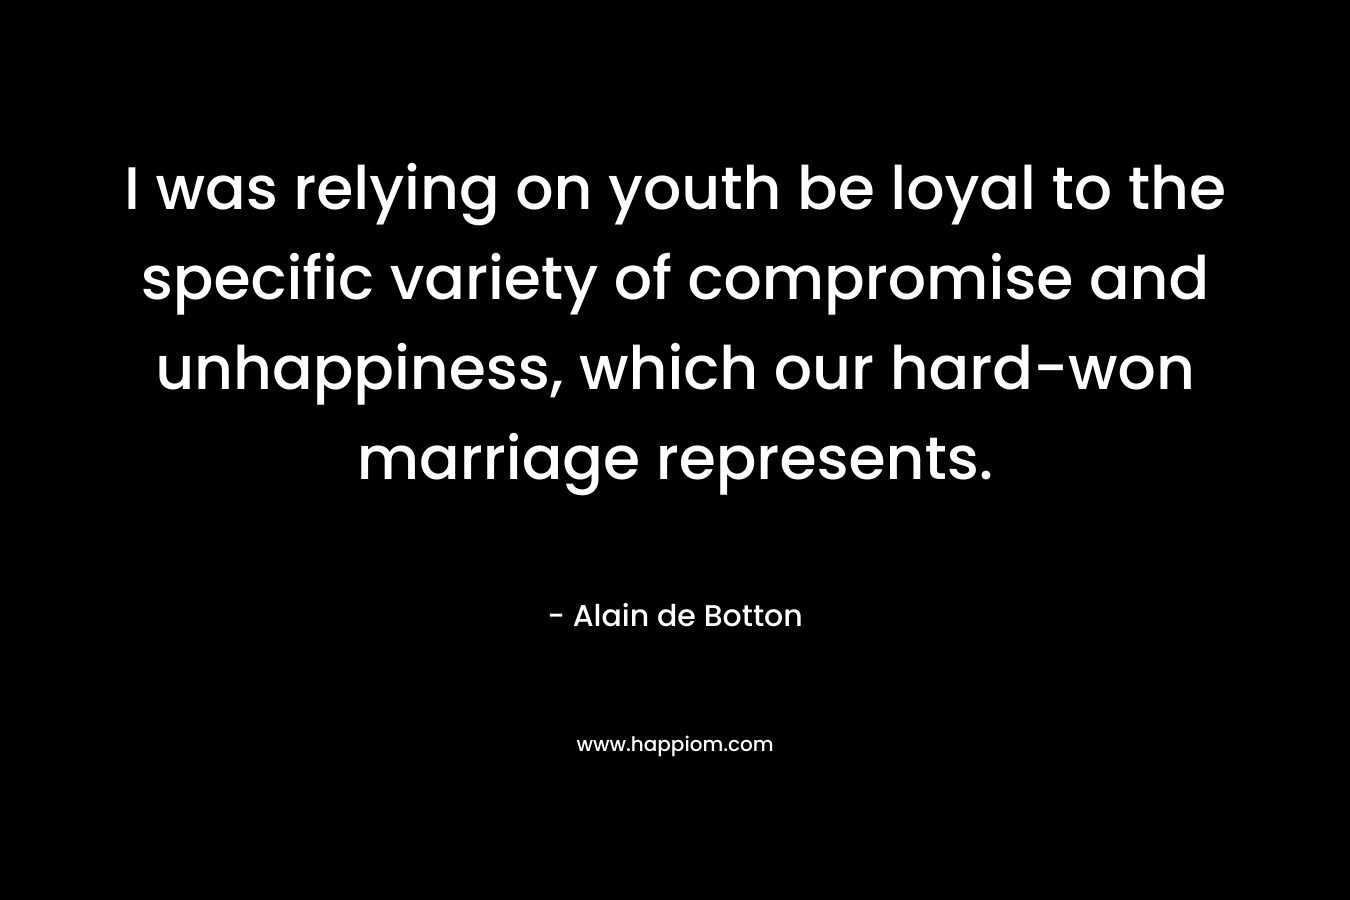 I was relying on youth be loyal to the specific variety of compromise and unhappiness, which our hard-won marriage represents. – Alain de Botton